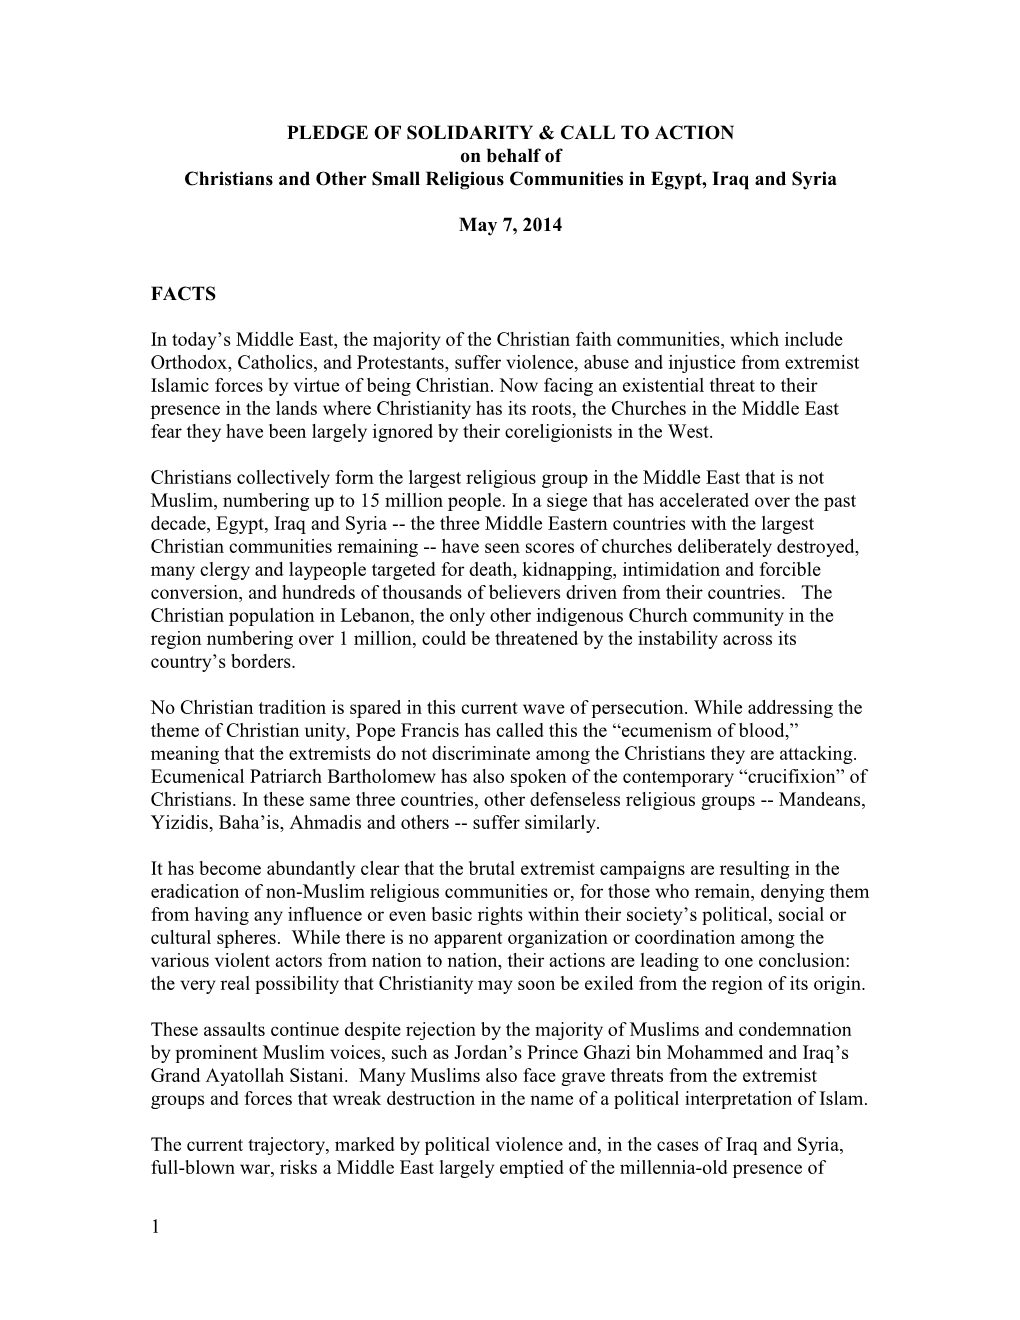 1 PLEDGE of SOLIDARITY & CALL to ACTION on Behalf of Christians and Other Small Religious Communities in Egypt, Iraq And